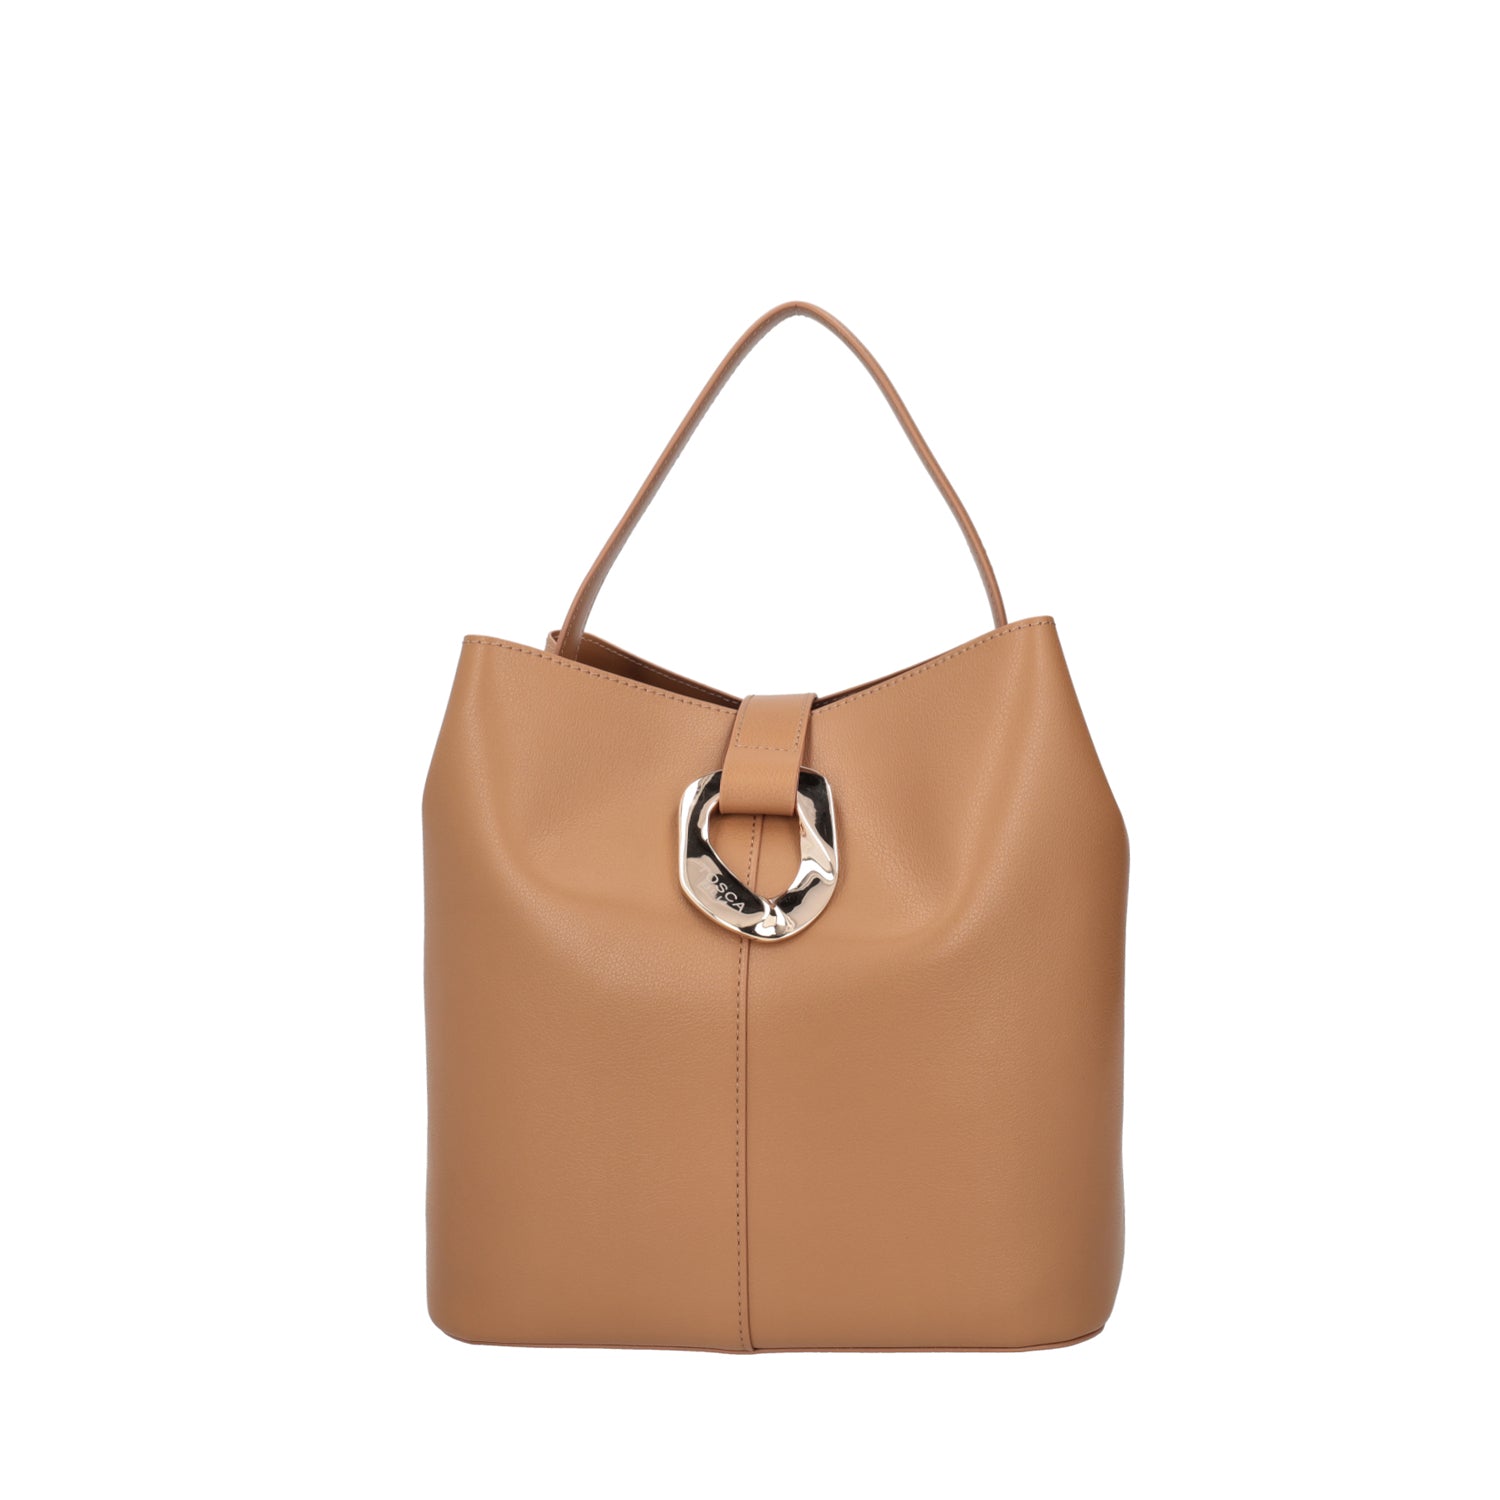 Women's bags: elegant, practical and colorful | Tosca Blu